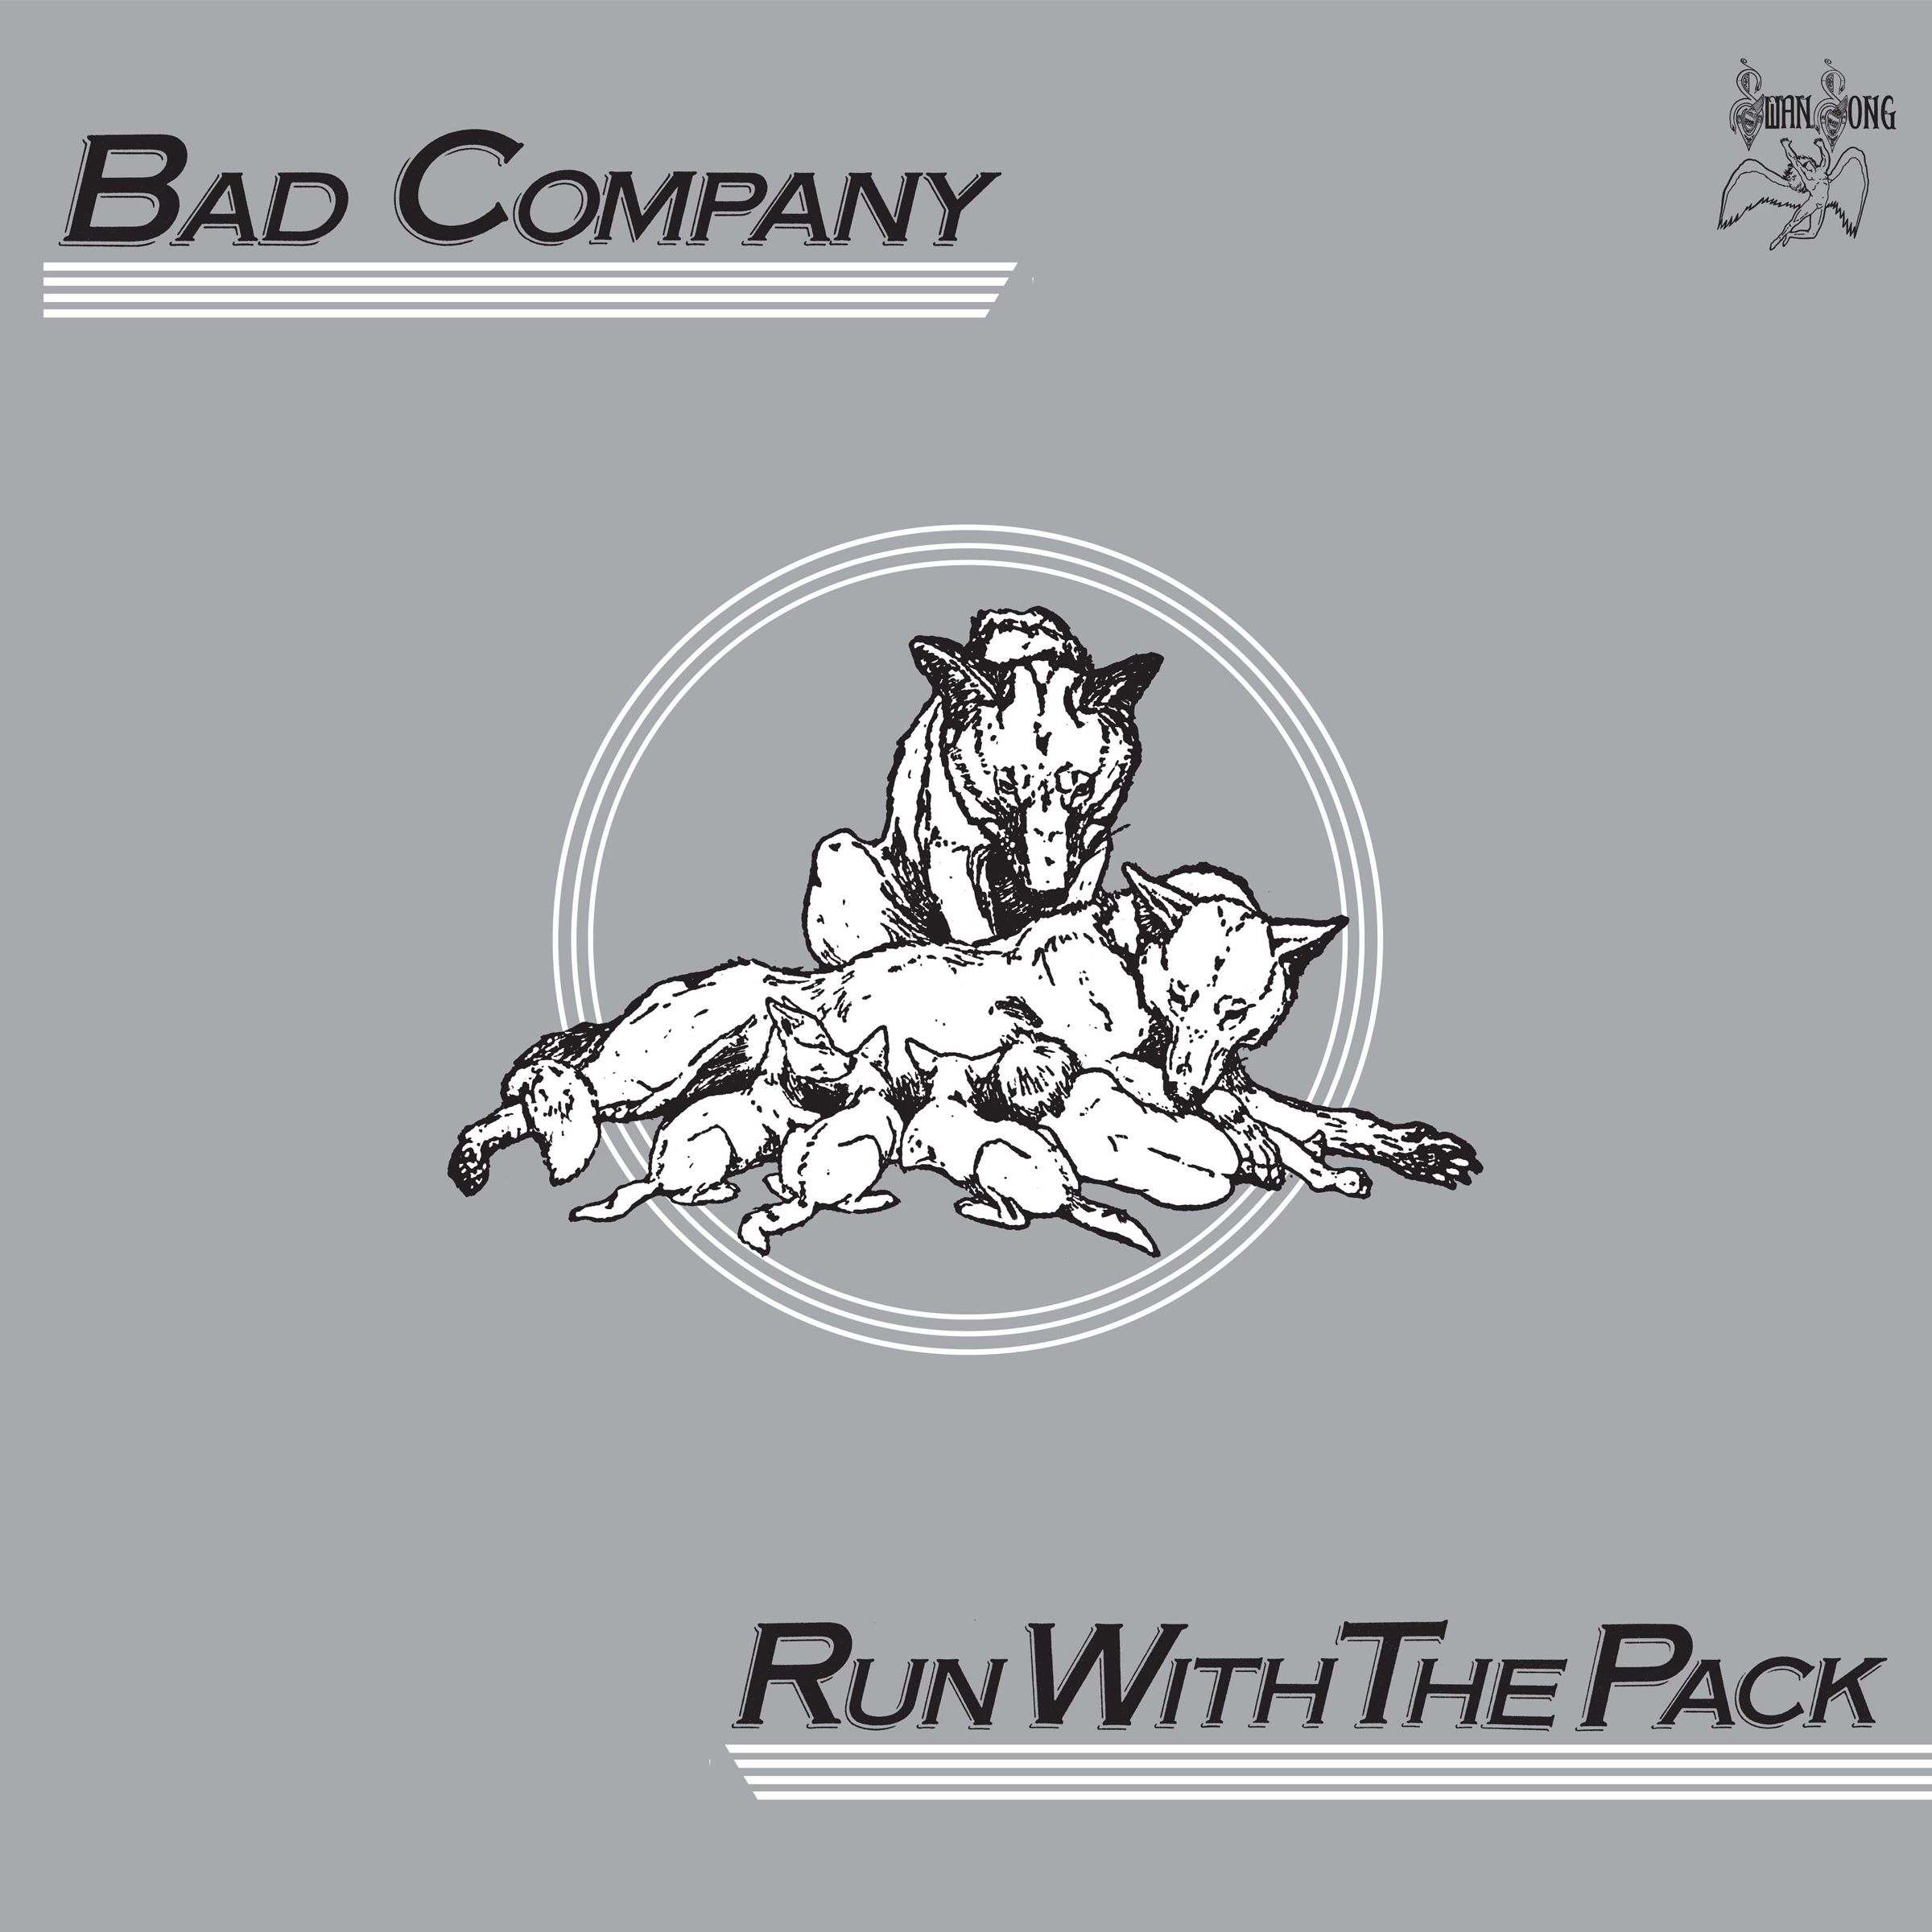 Bad Company – Run With The Pack (1976) {Deluxe Edition 2017} [HDTracks FLAC 24bit/96kHz]